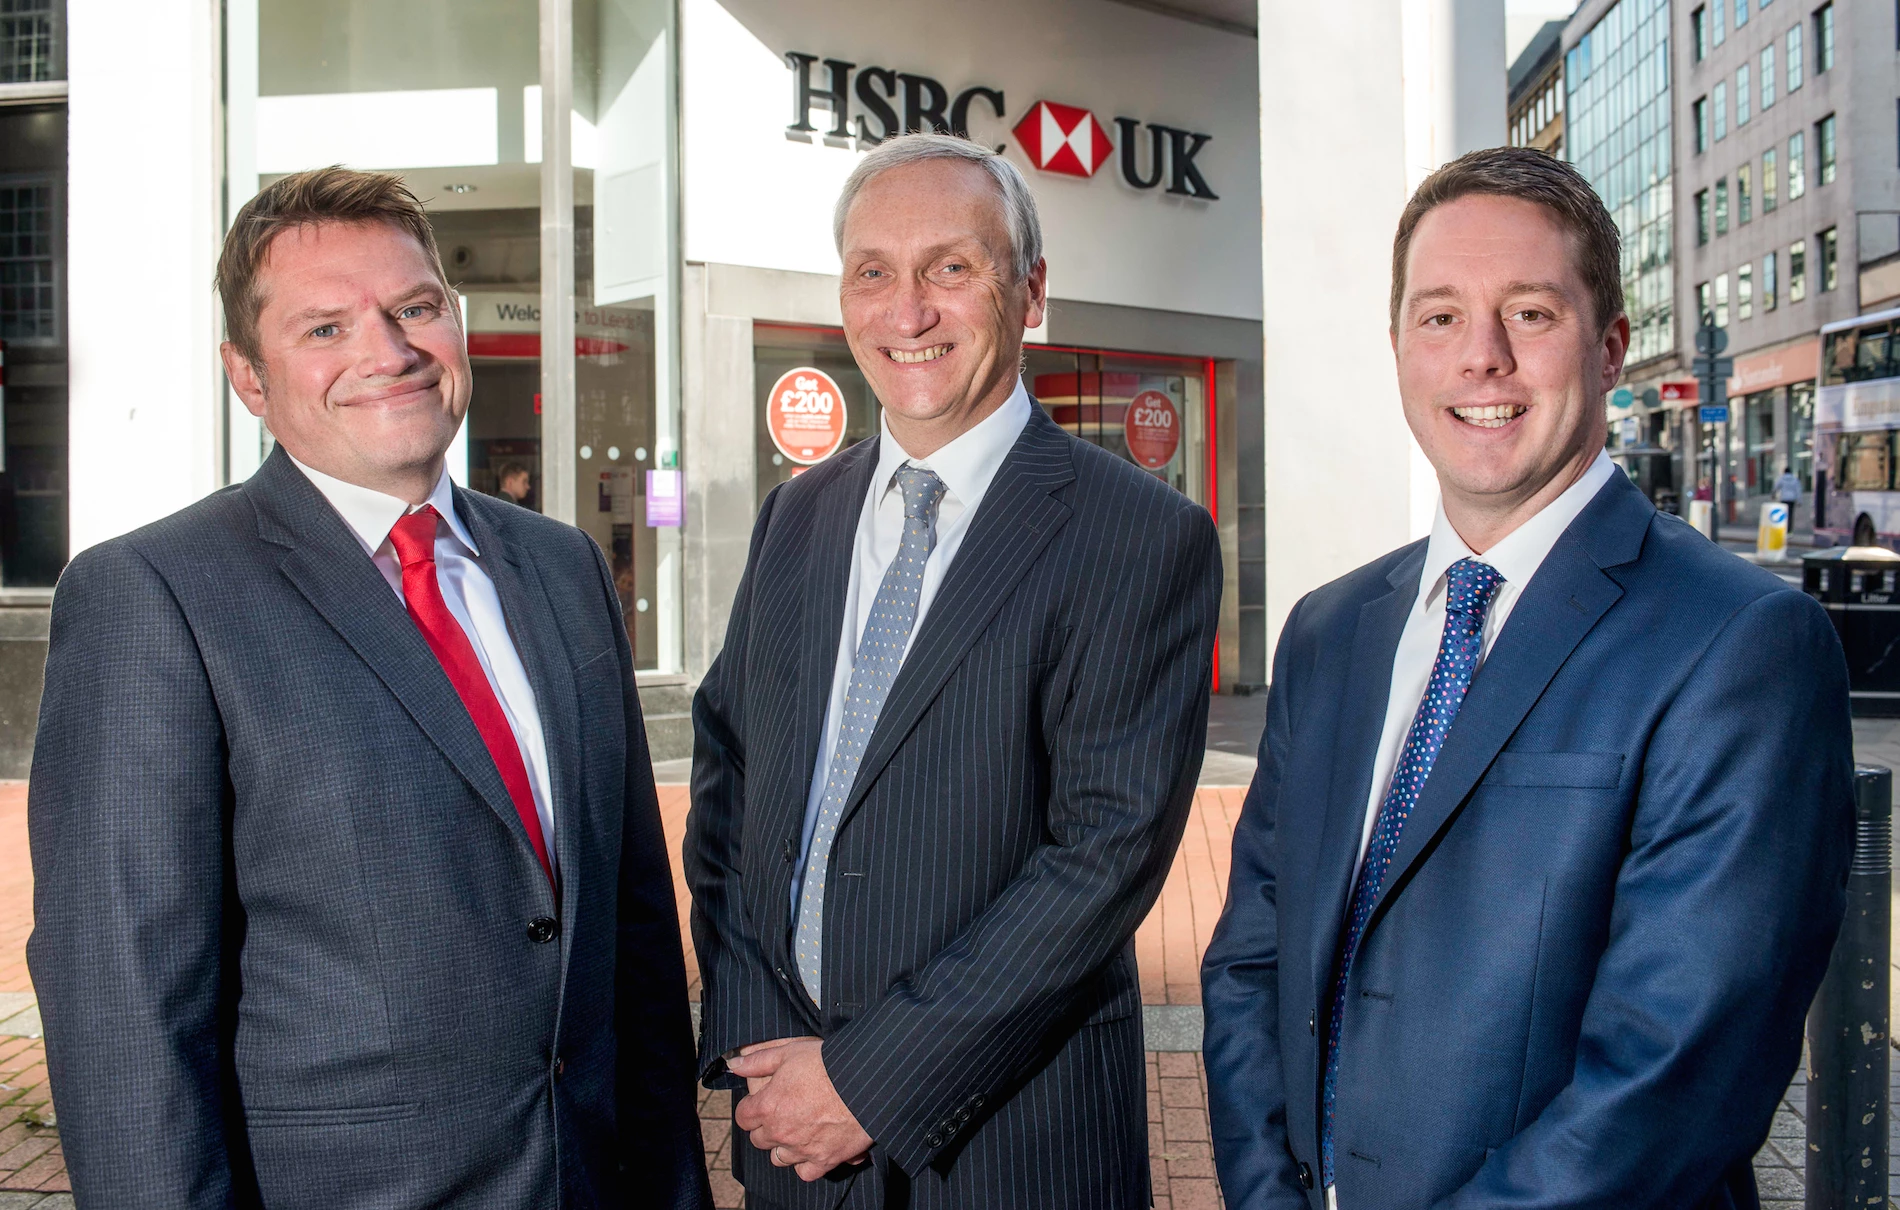 Jamie McCullough, HSBC Relationship Director, Mike Swift, HSBC Area Director for West & South Yorkshire, Mark Watson, HSBC Relationship Director